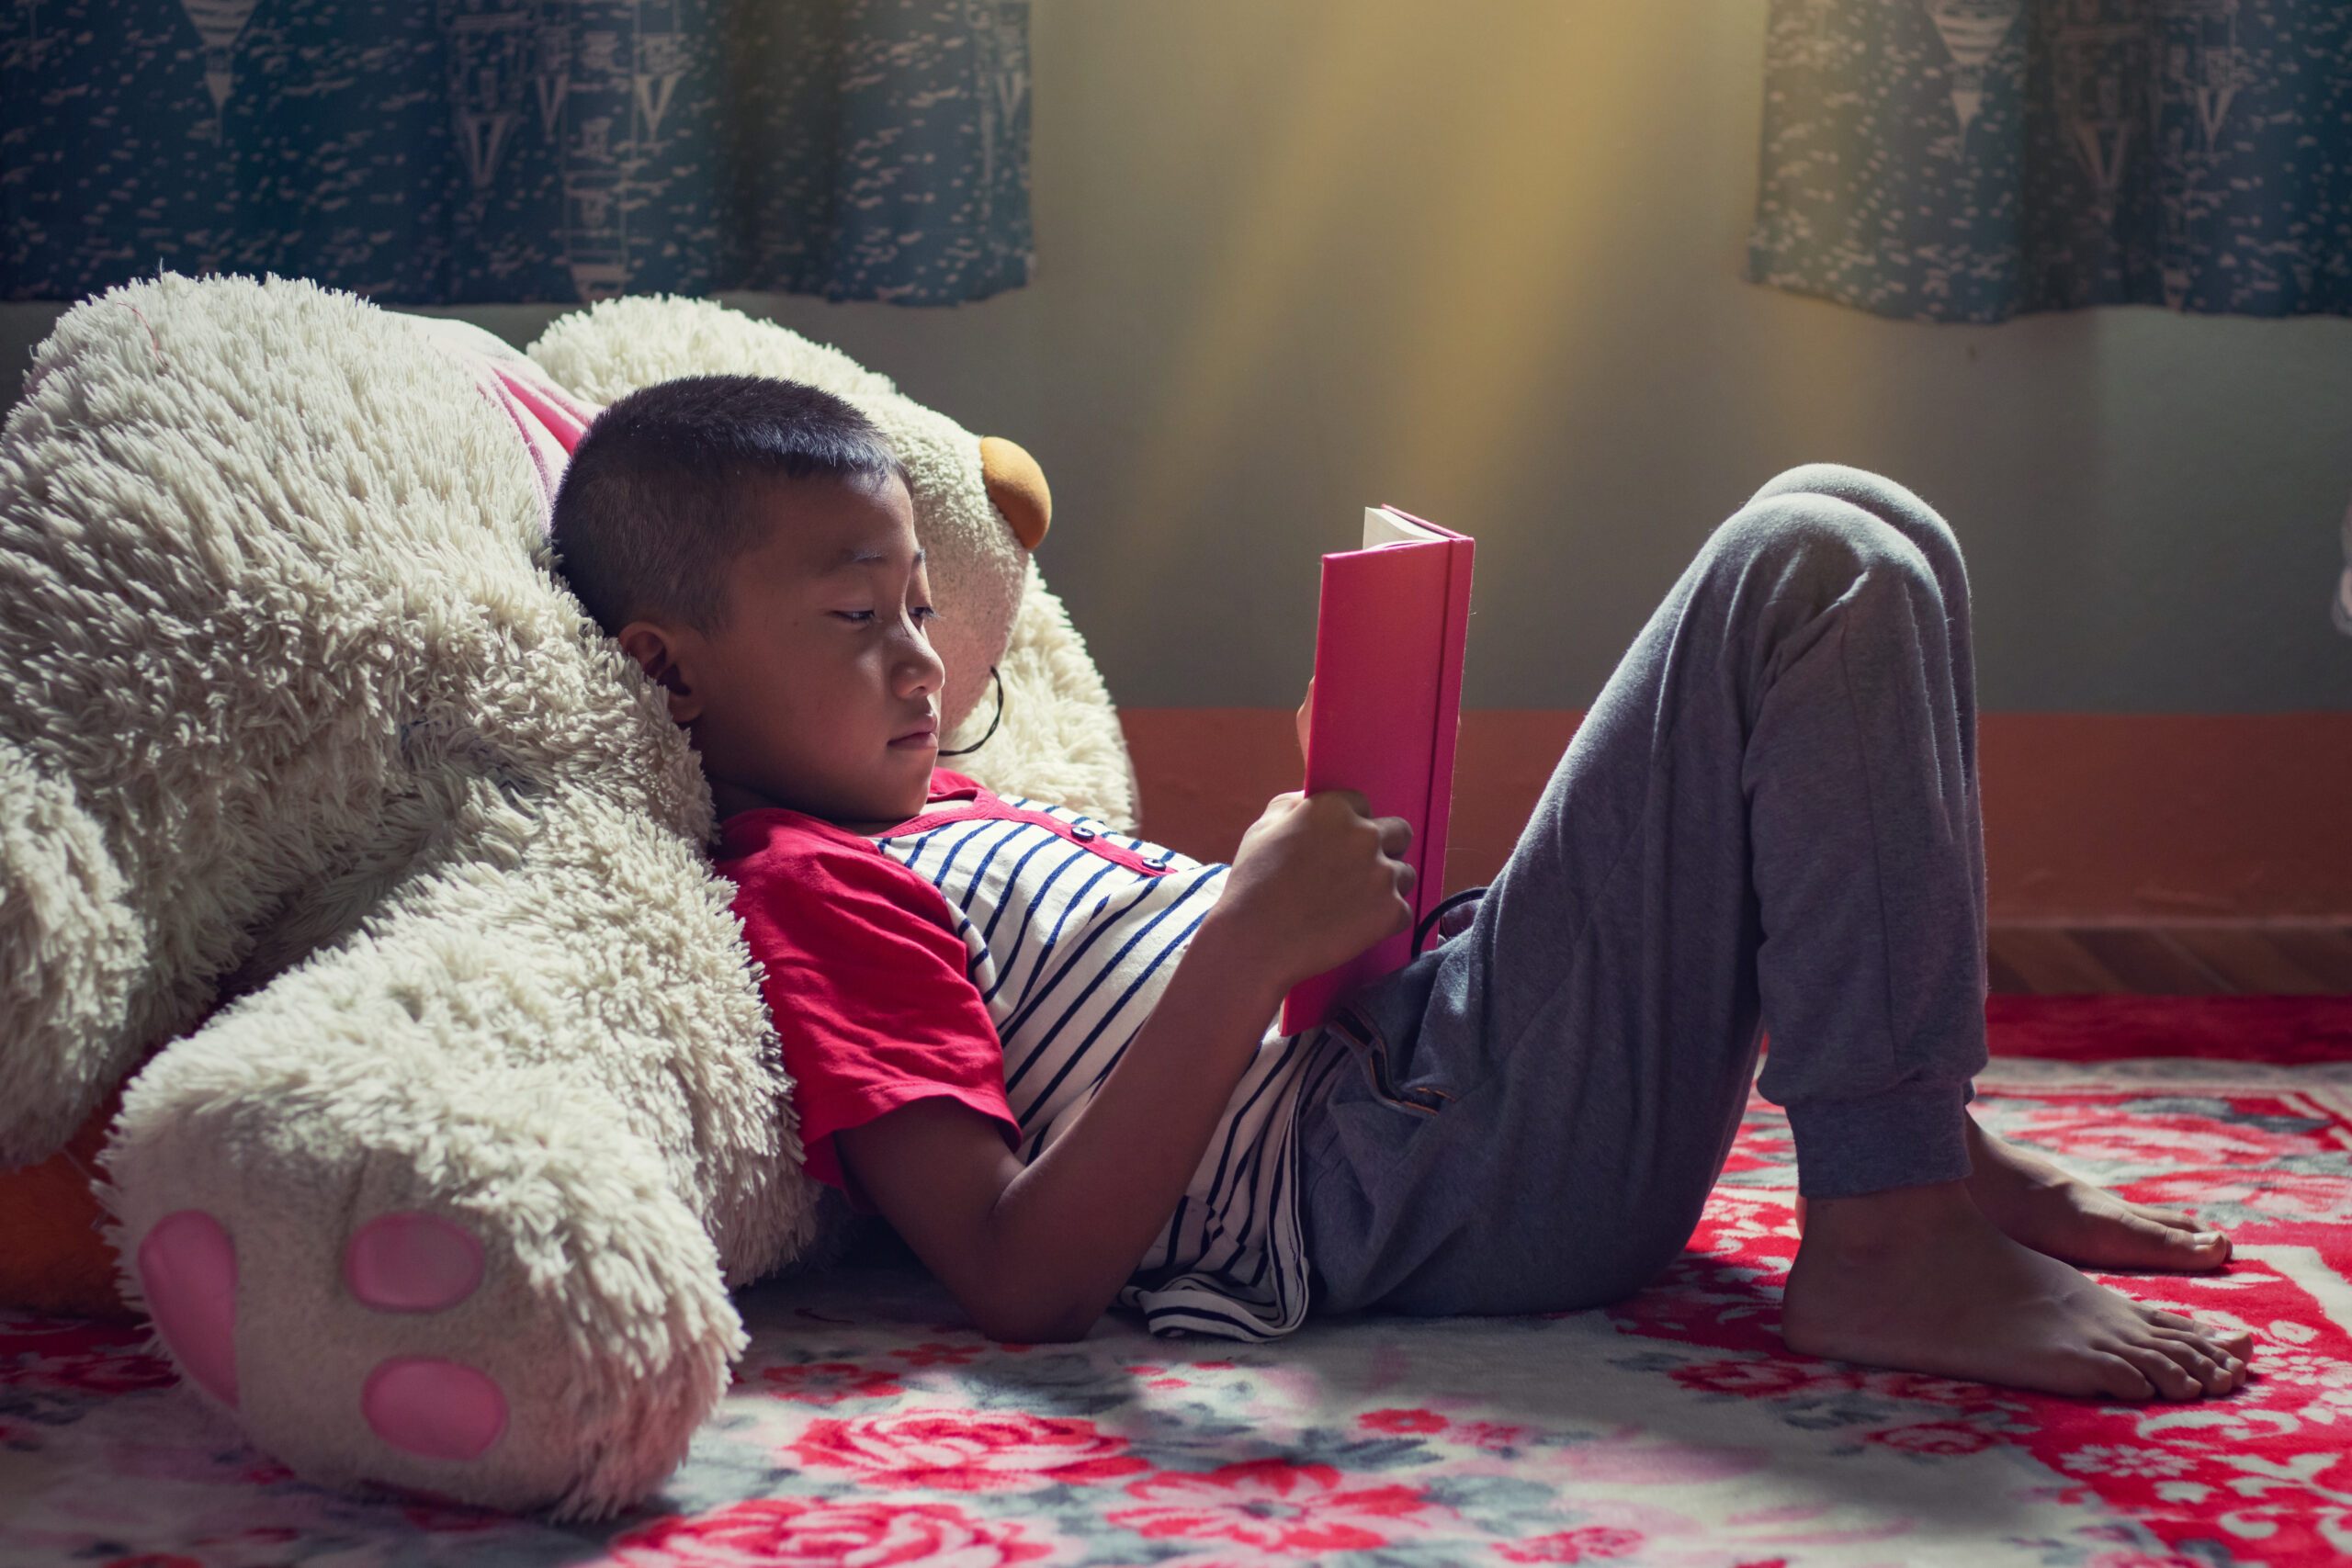 Young boy reading a book